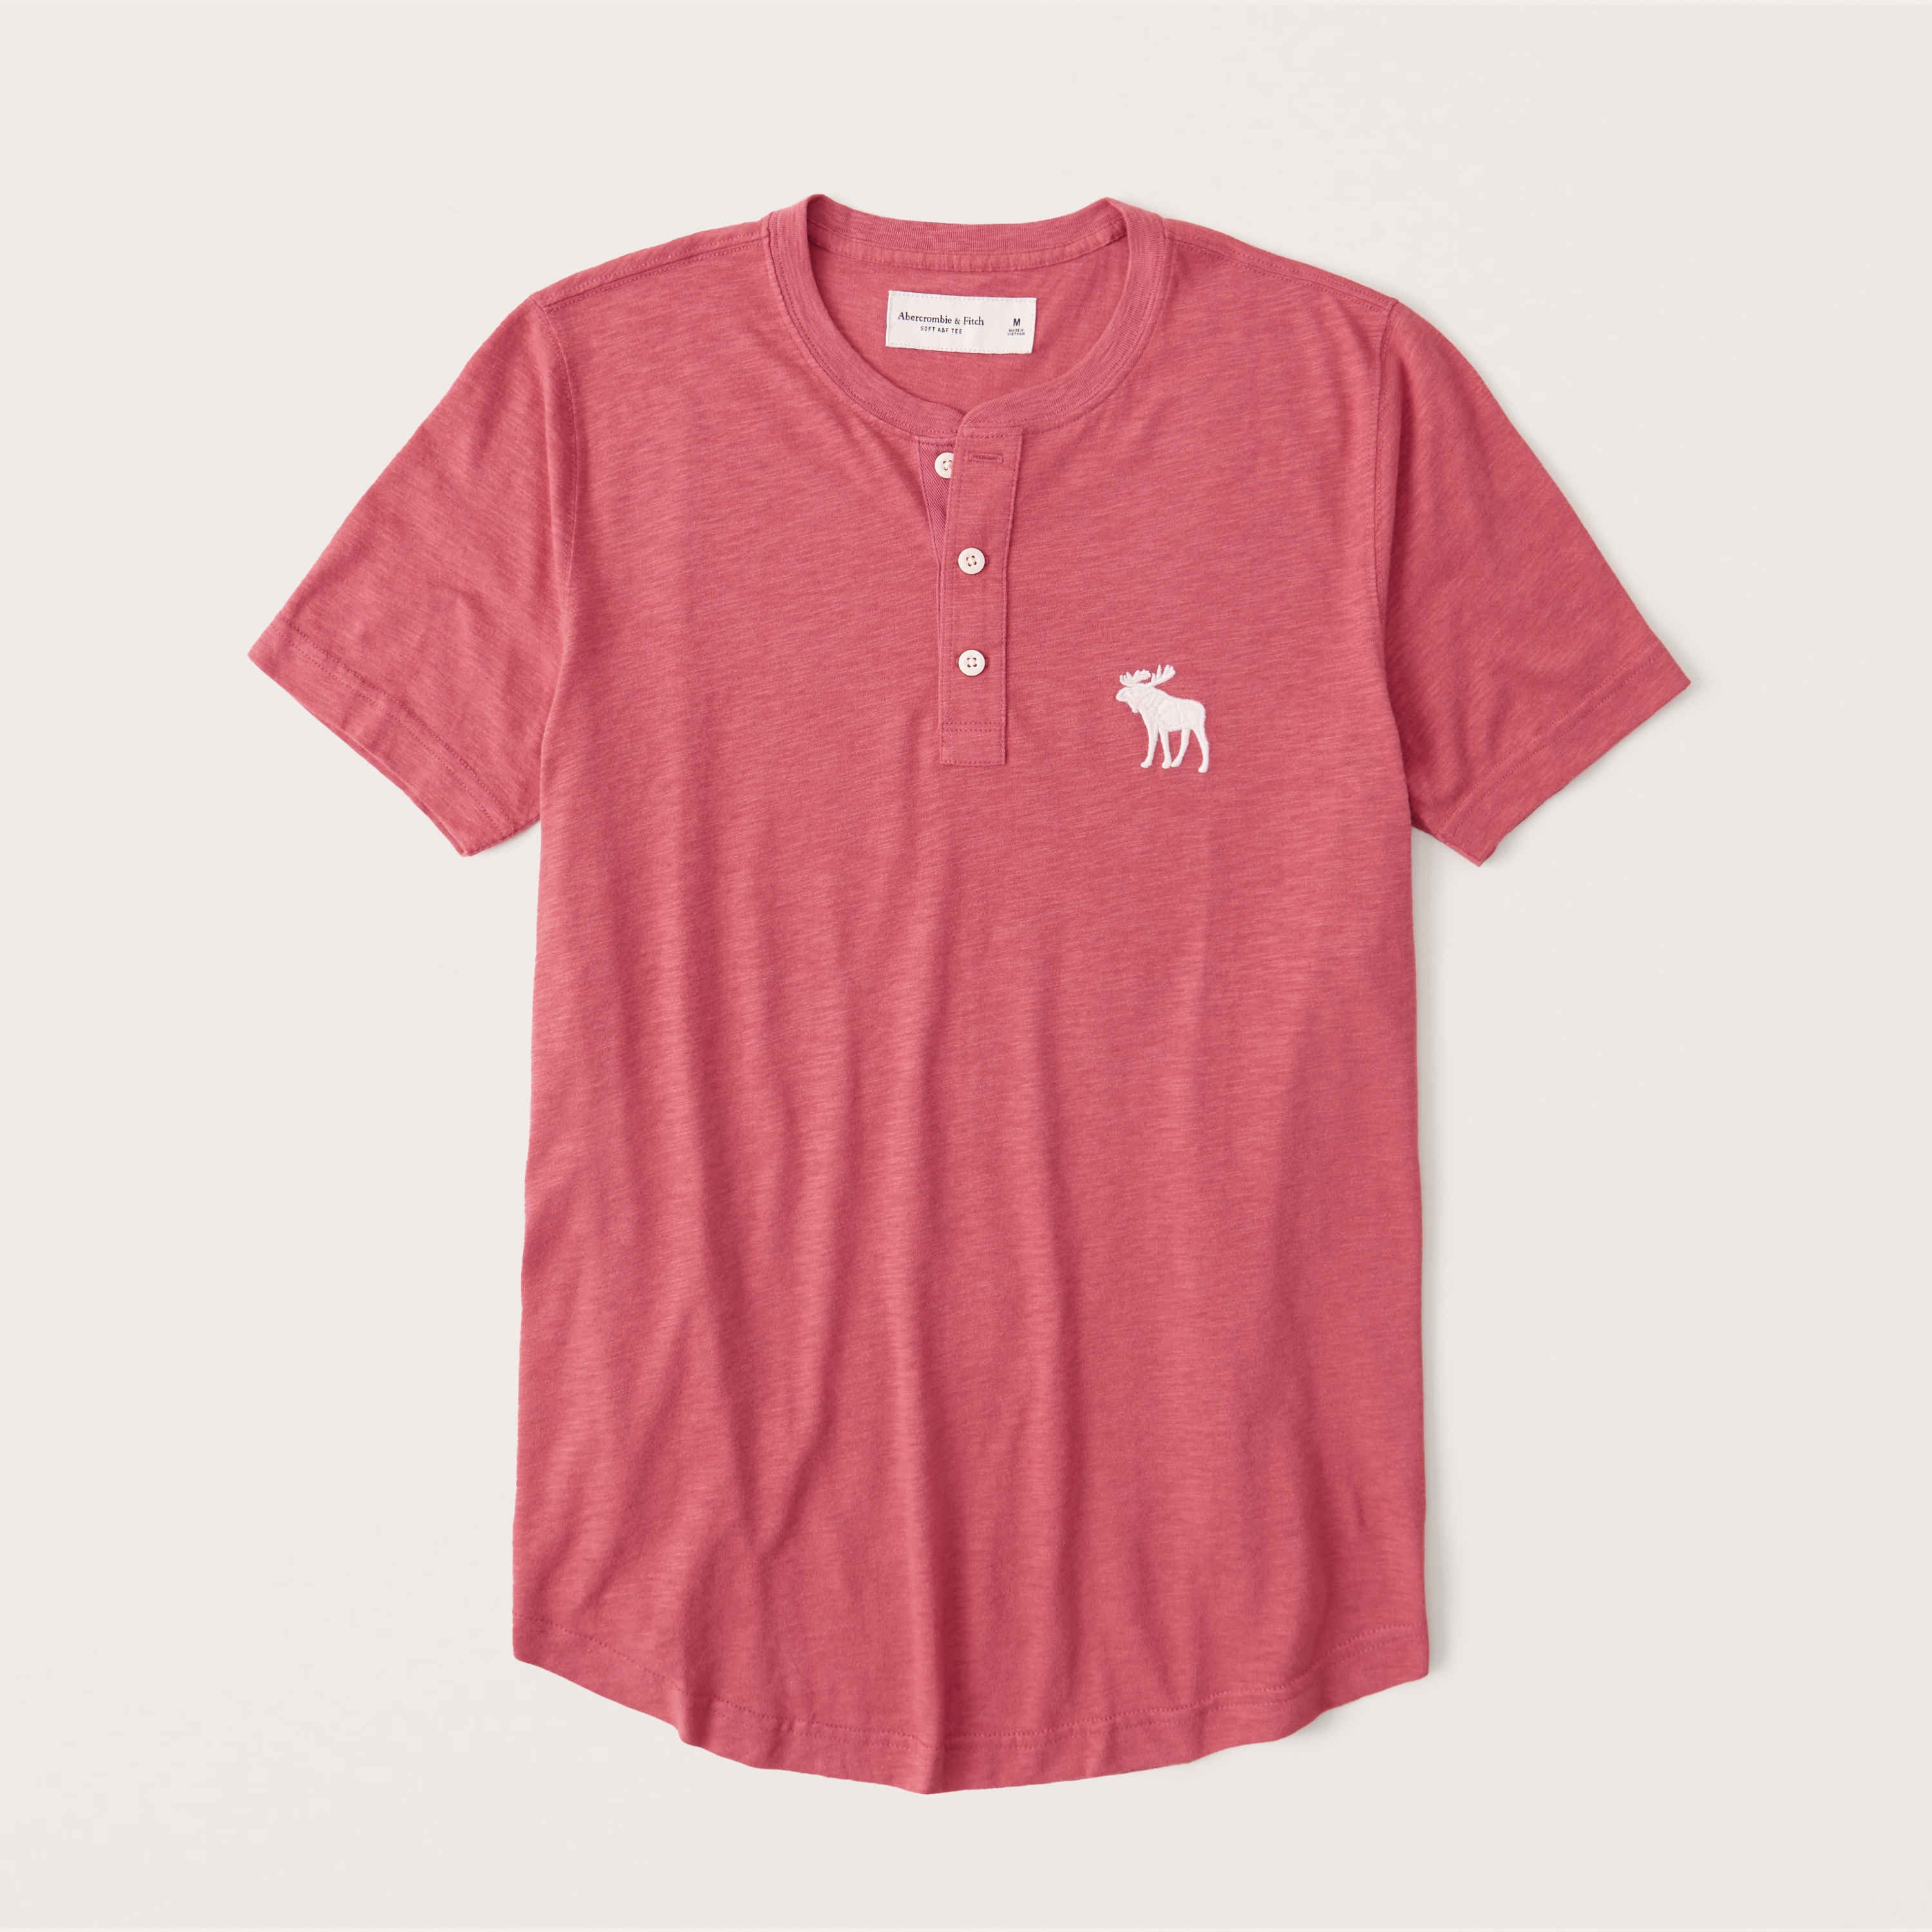 abercrombie and fitch mens t shirts